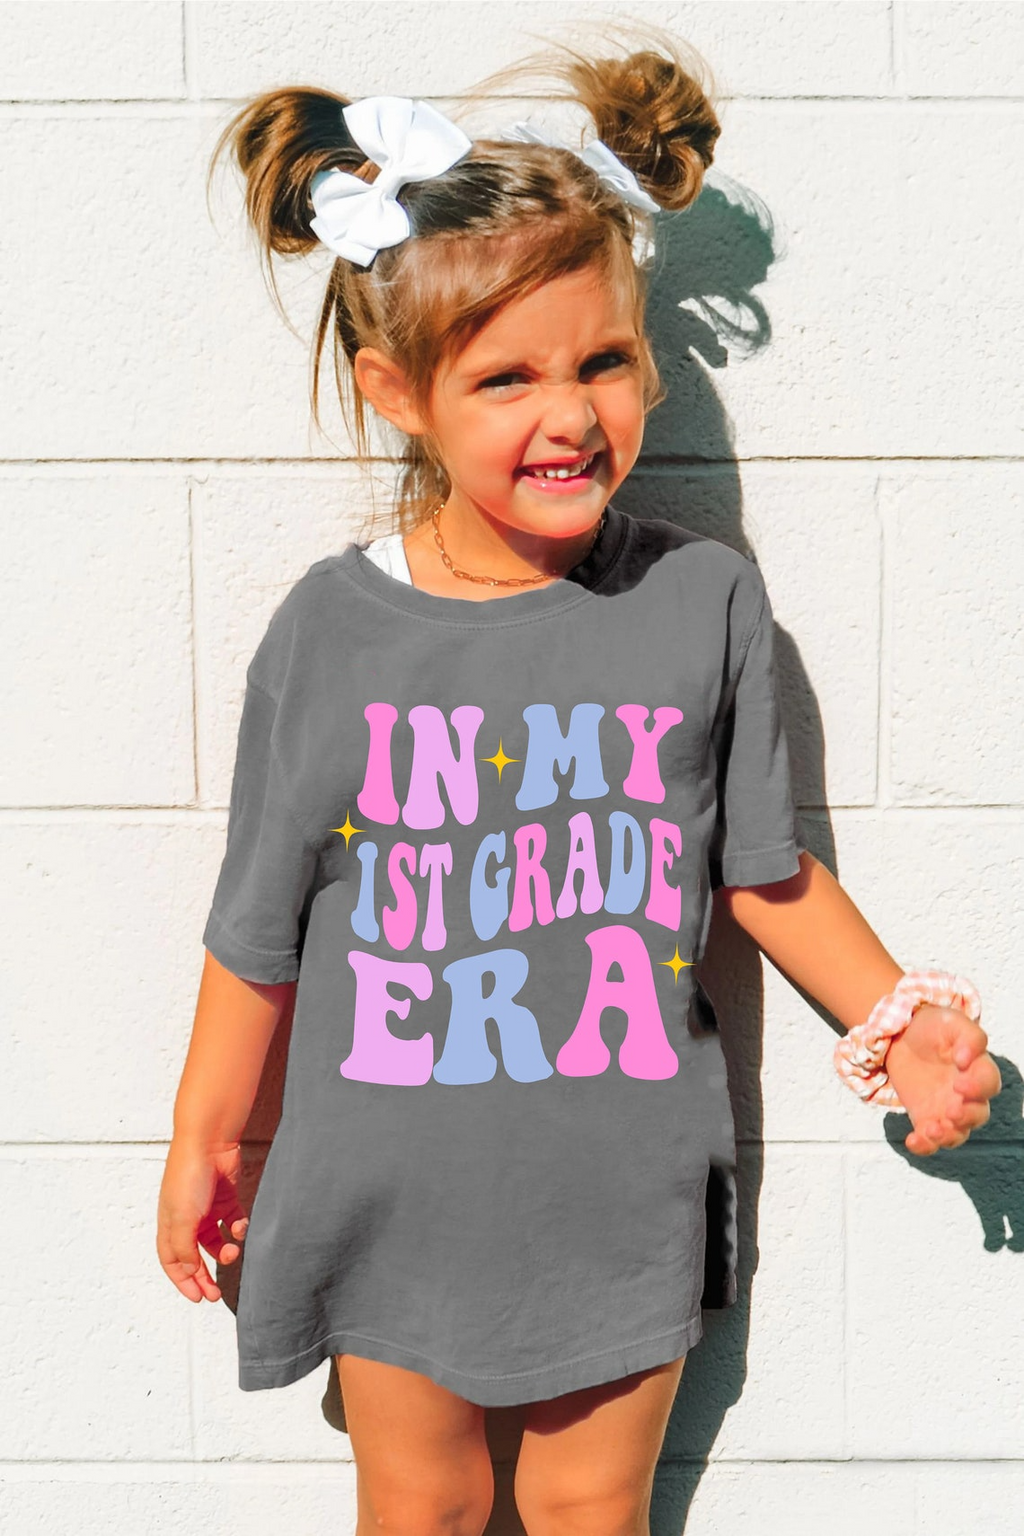 In My First Grade Era, First Day of School Shirt, Retro 1st Grader Shirt, Back to School Elementary Shirt, 1st Grade Outfit